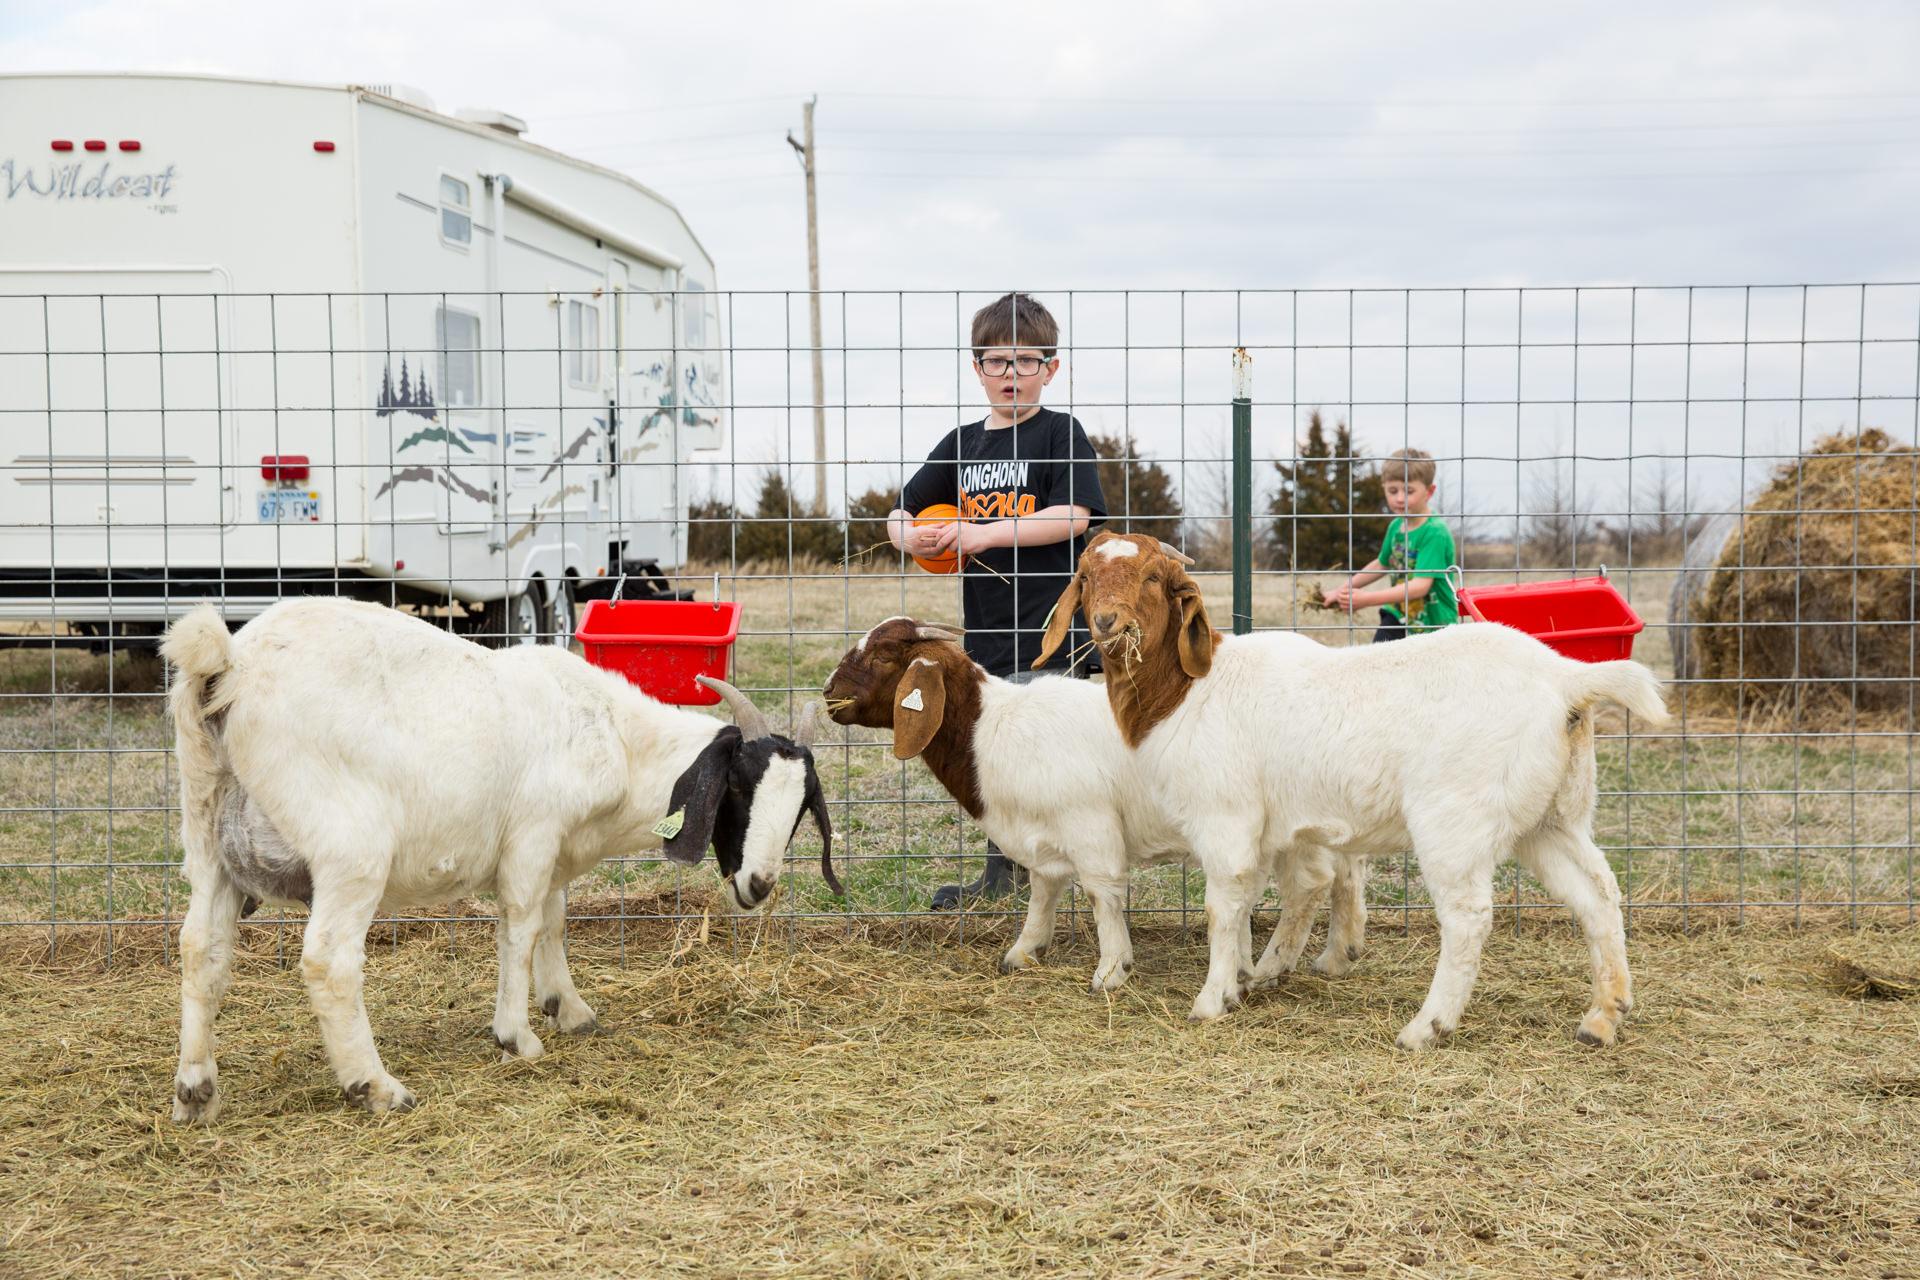 Robert Wood Johnson Foundation - Jake Knoll, 7, feeds the goats at his family's farm in...